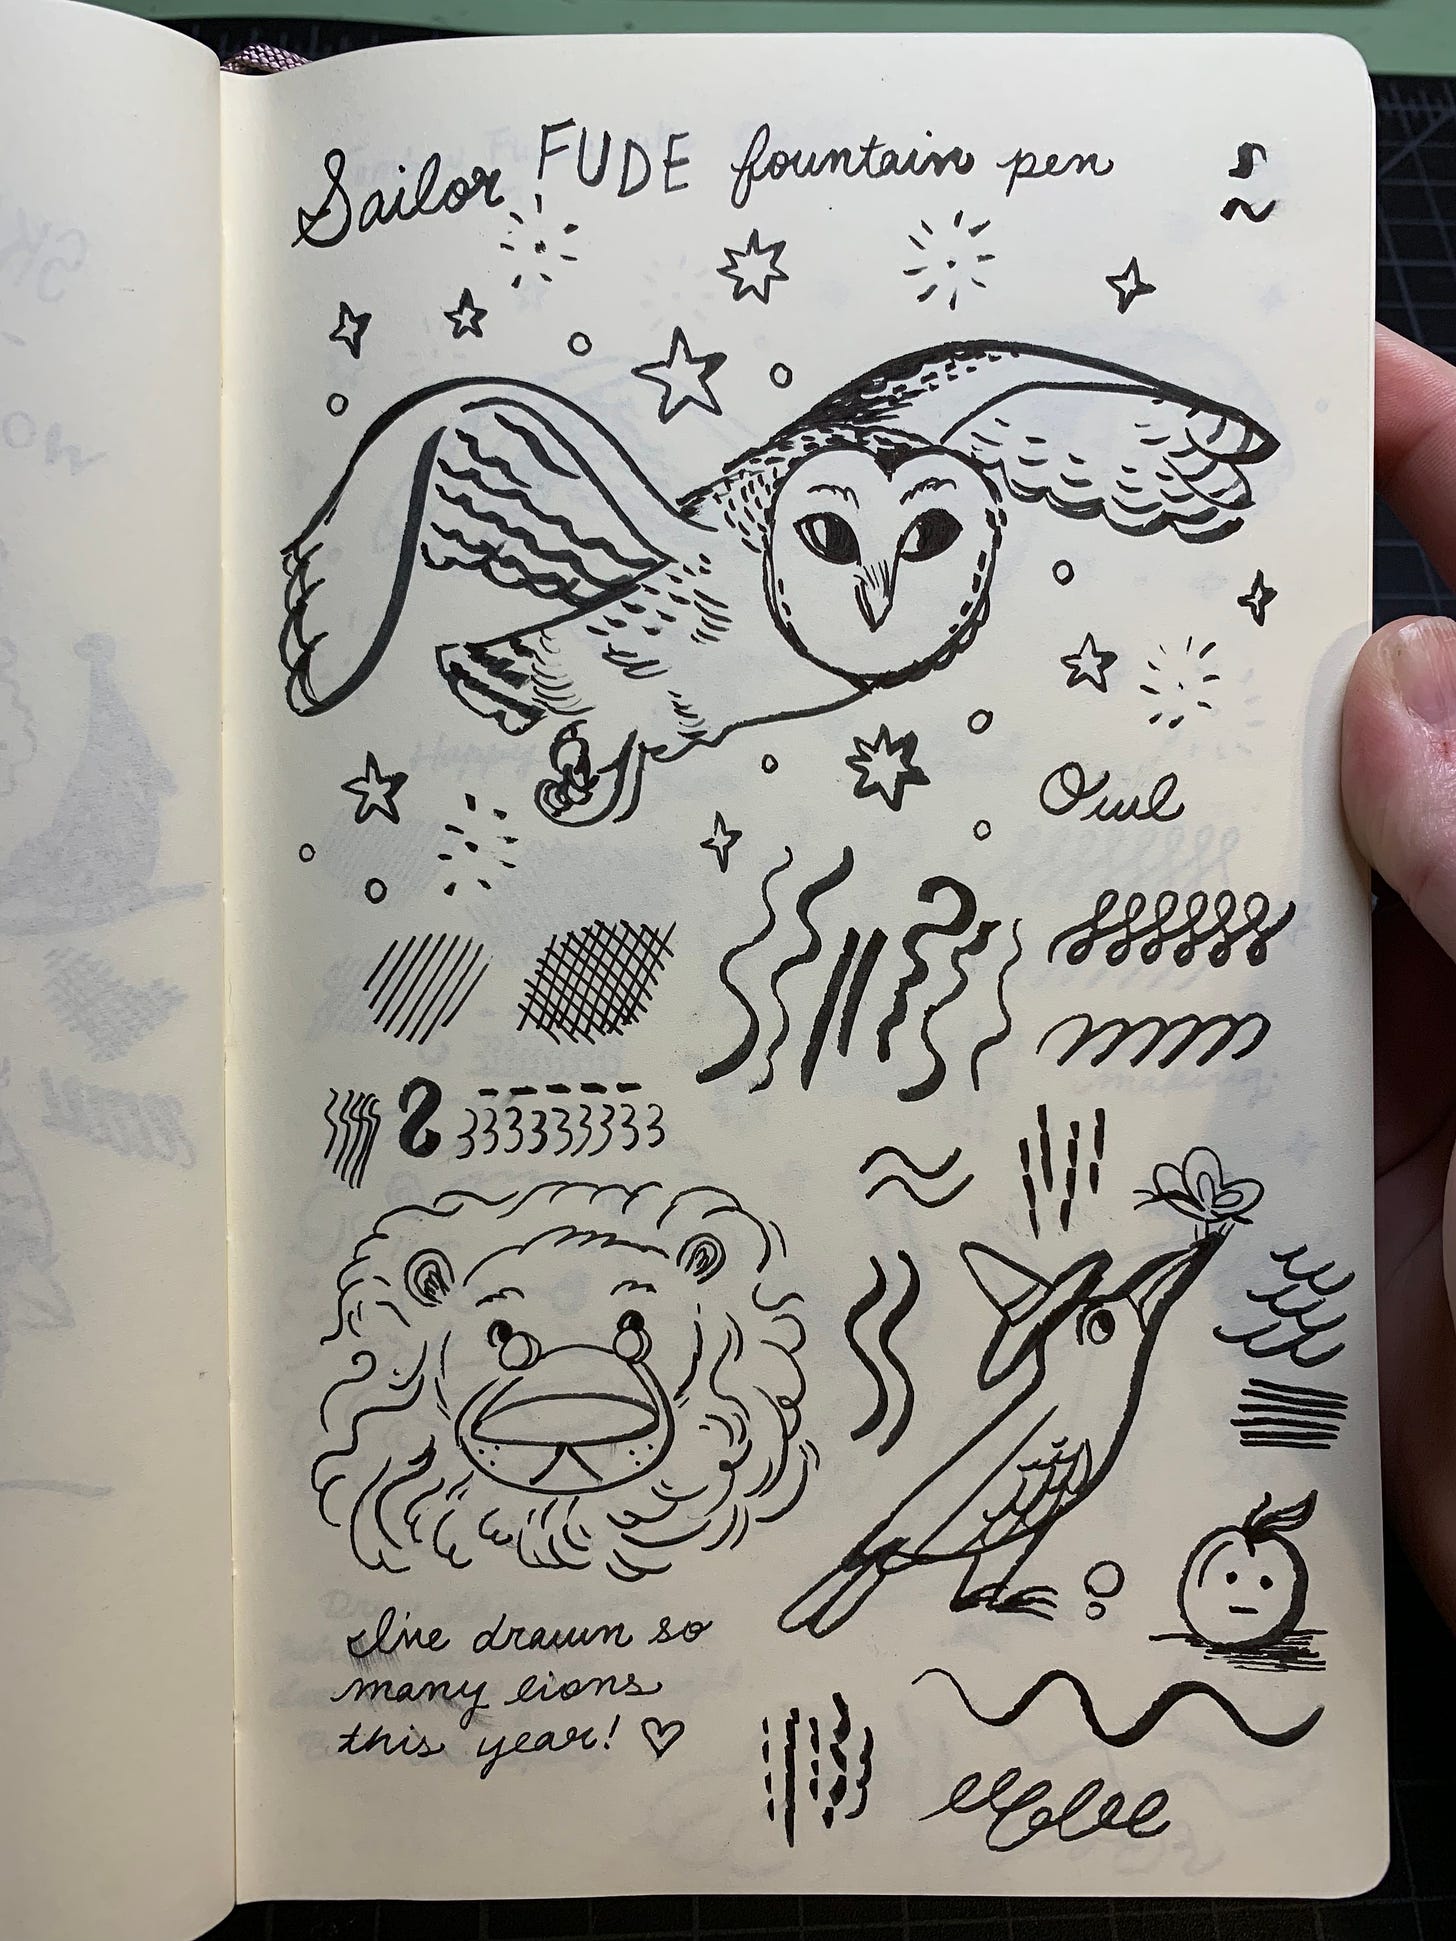 illustrations and marks using the Sailor FUDE fountain pen by Kayla Stark